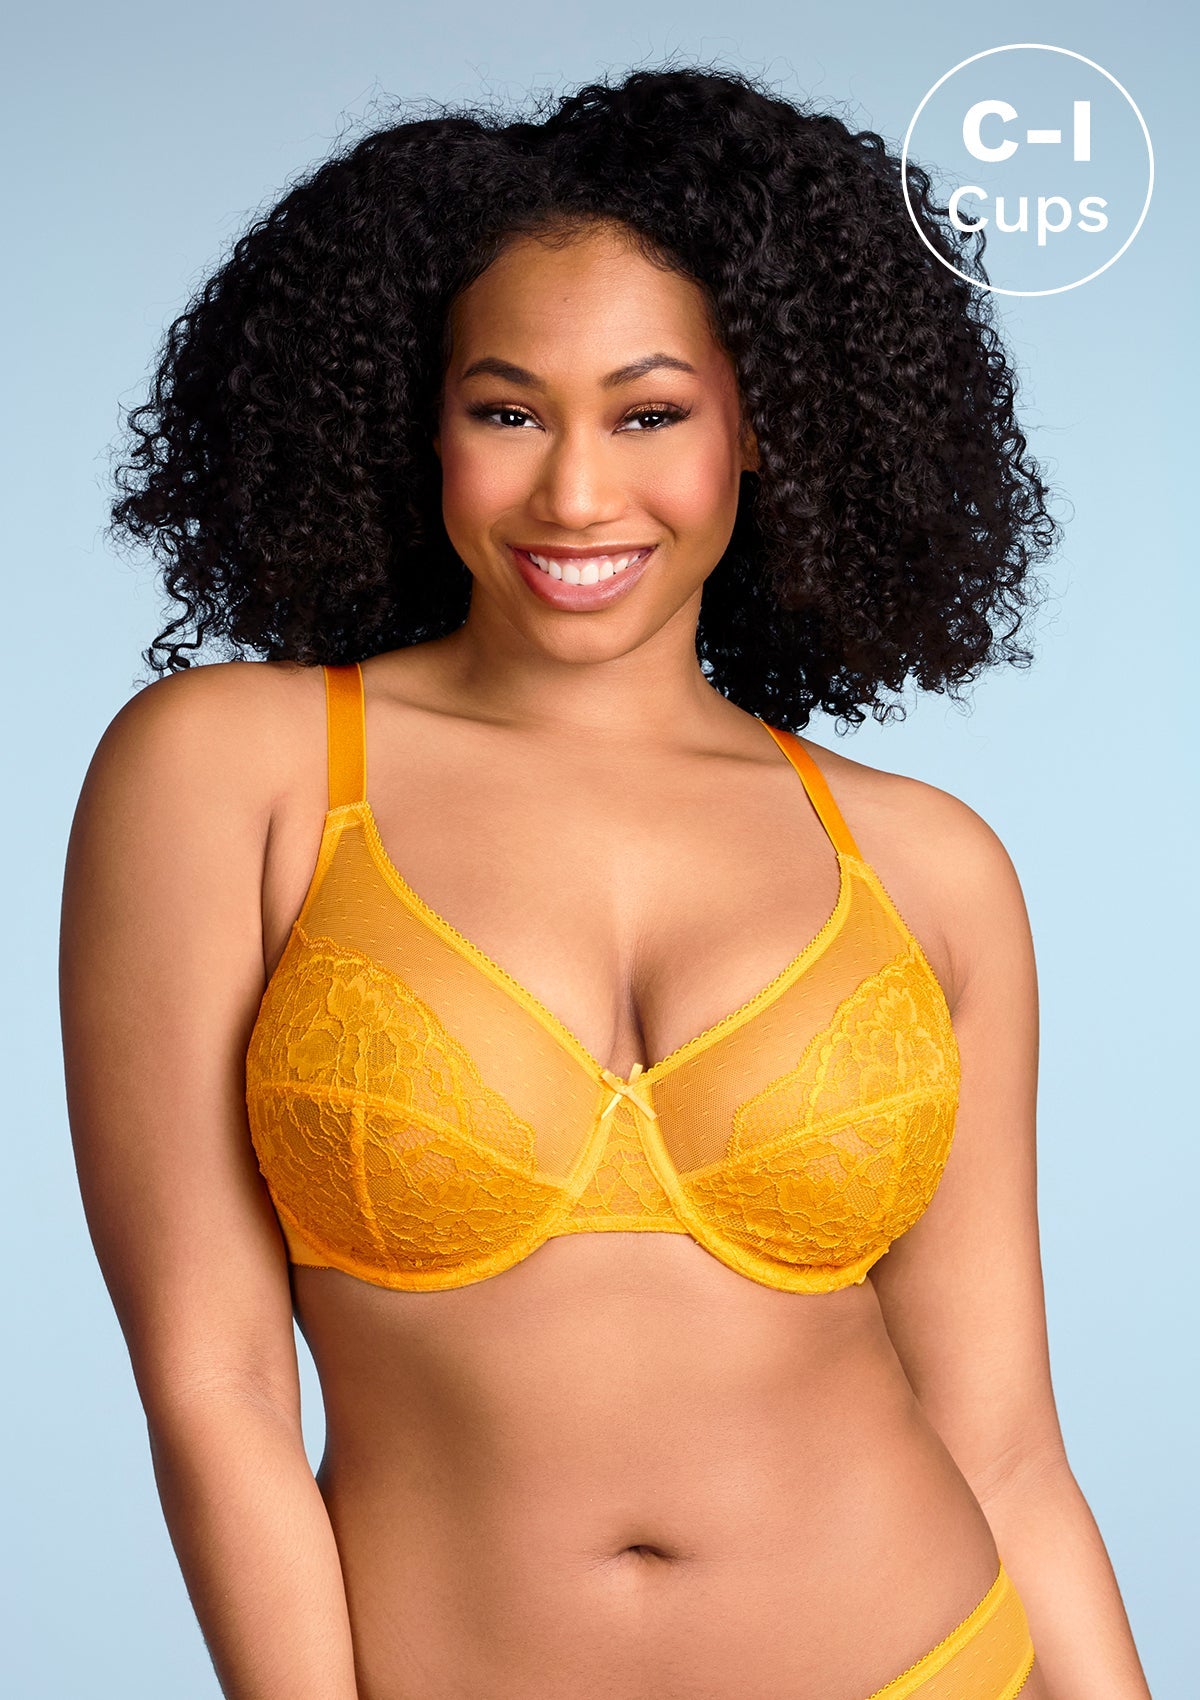 HSIA Enchante Bra And Panty Sets: Unpadded Bra With Back Support - Cadmium Yellow / 38 / I